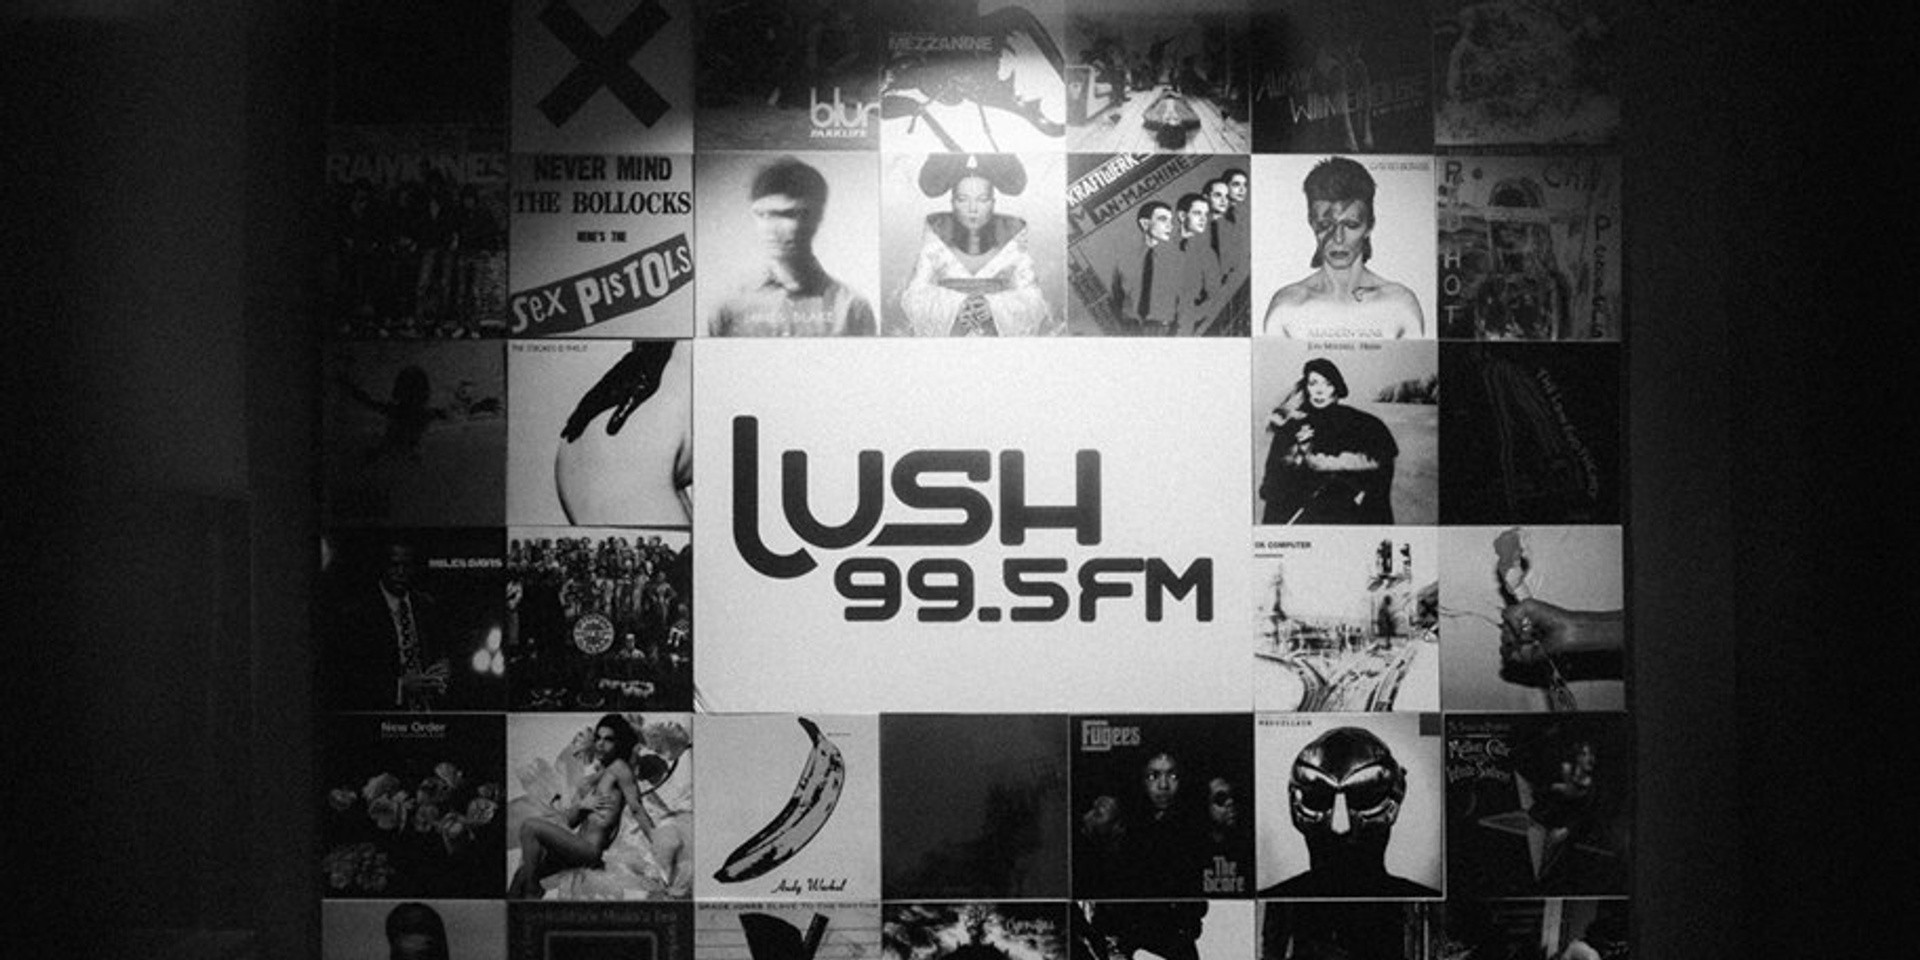 Lush 99.5FM's holding a free party to properly say goodbye